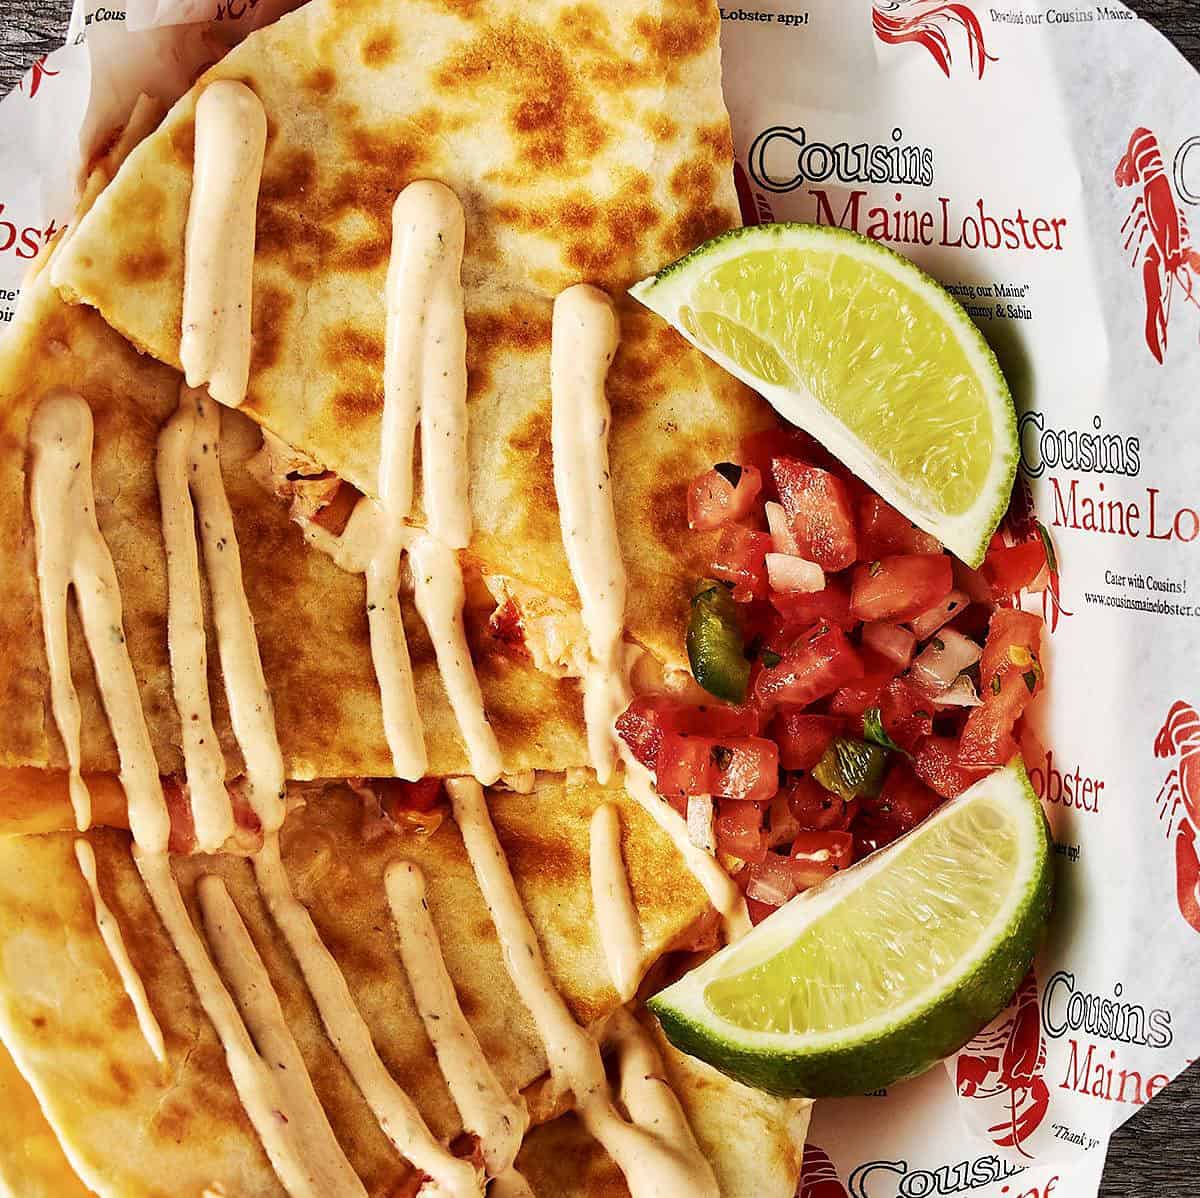  These quesadillas will make your taste buds sing with joy!